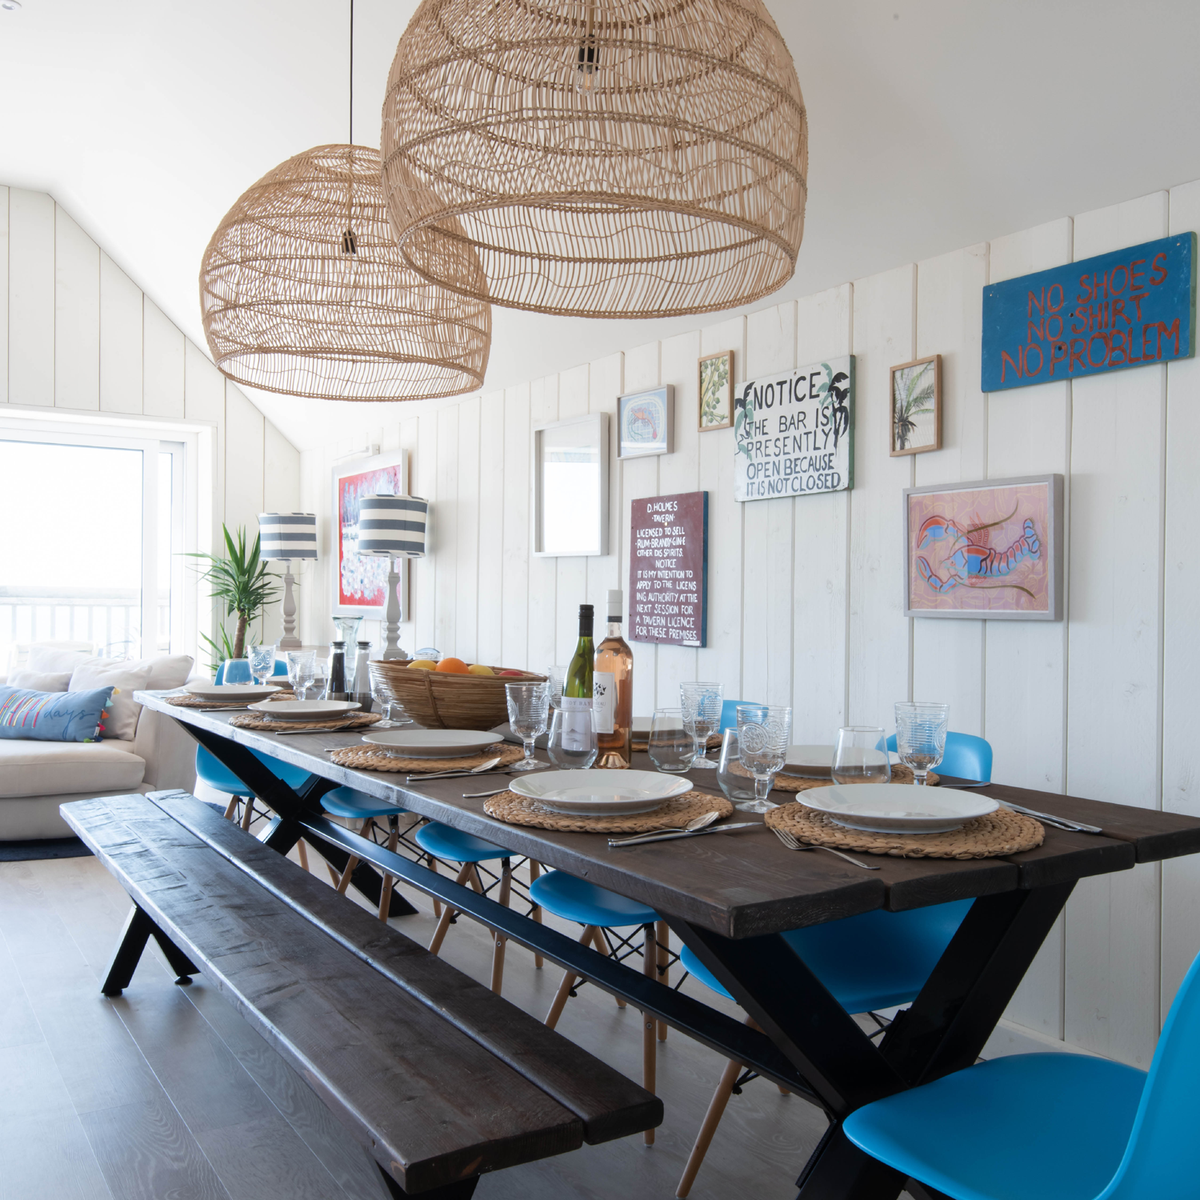 Easy Escapes: A luxury beach house on Hayling Island